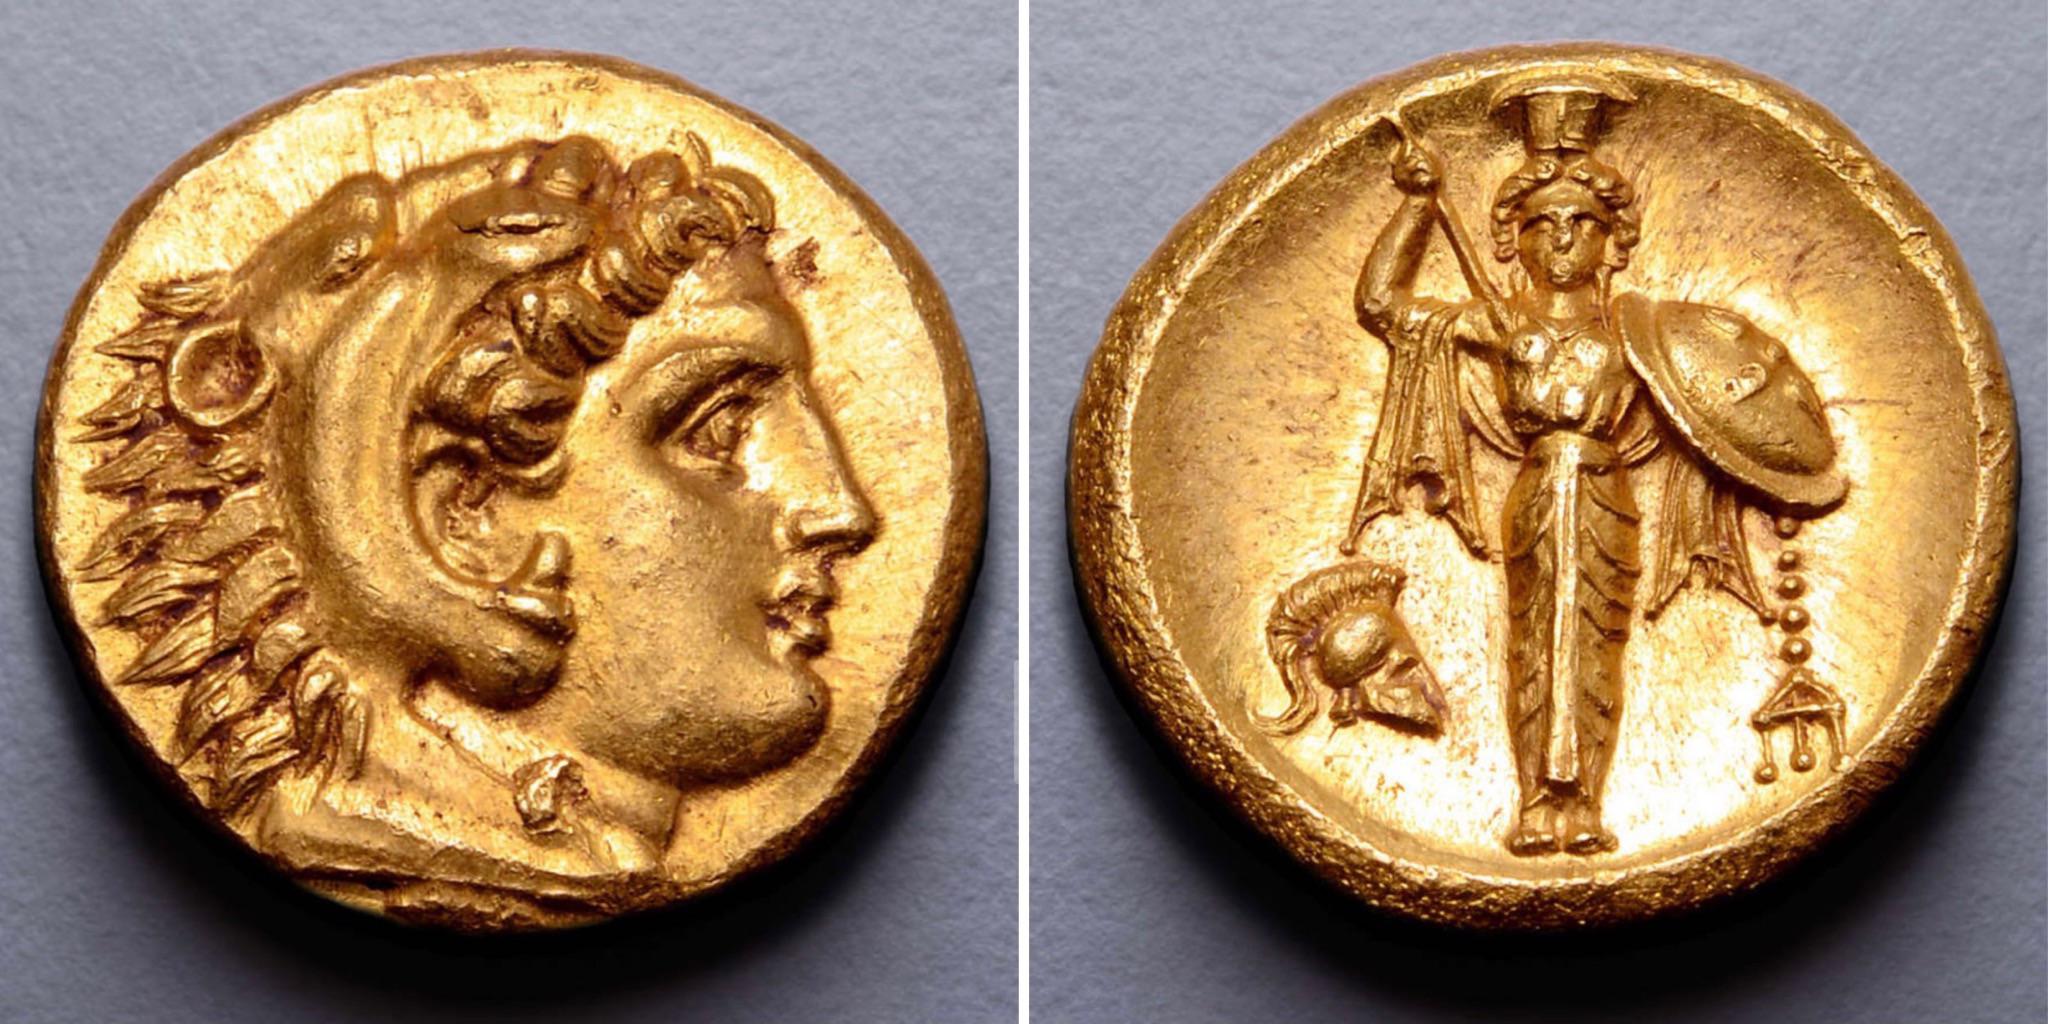 Uncirculated gold coin from Ancient Greece, 340-335 BC.jpg